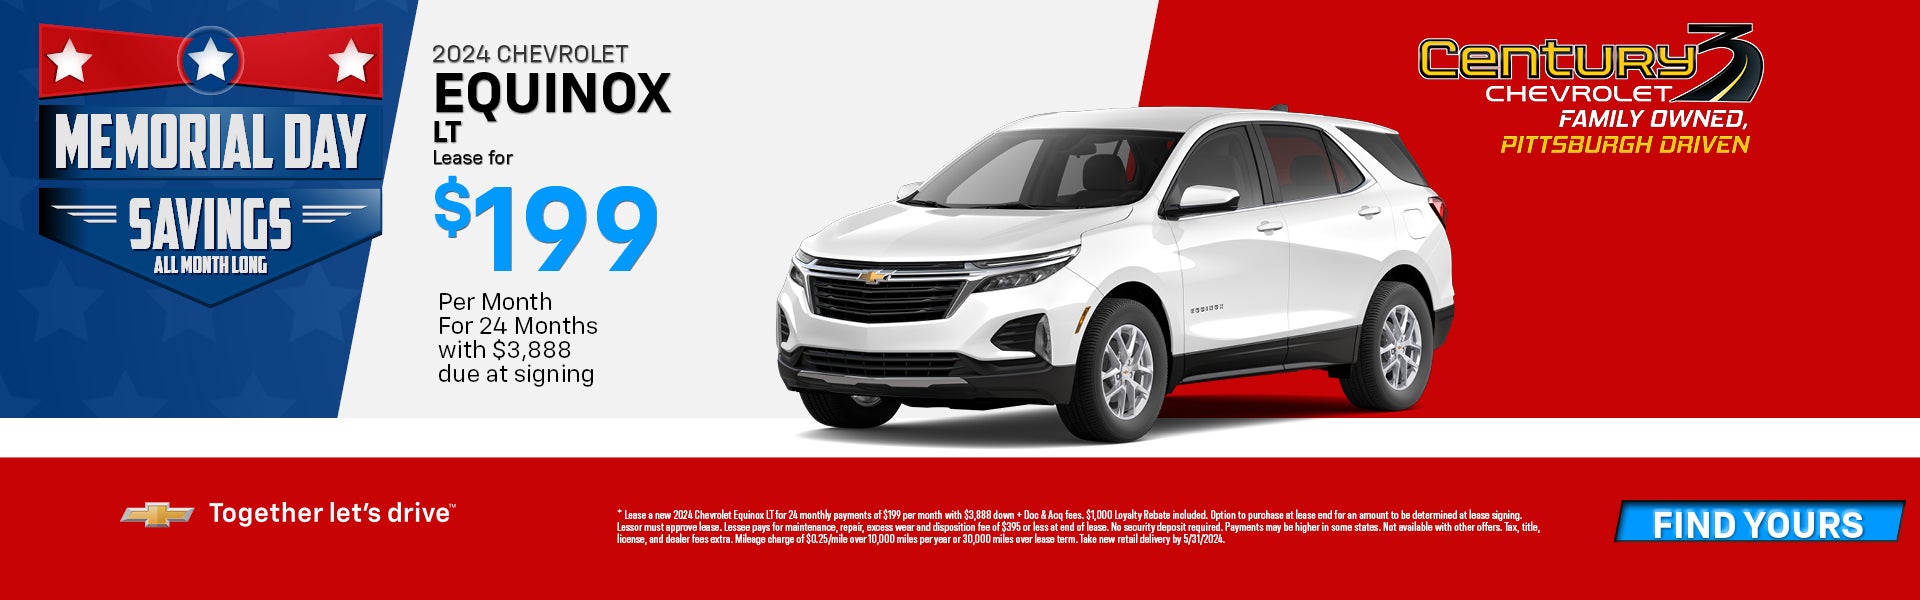 2024 Chevrolet Trax Special at Century 3 Chevrolet